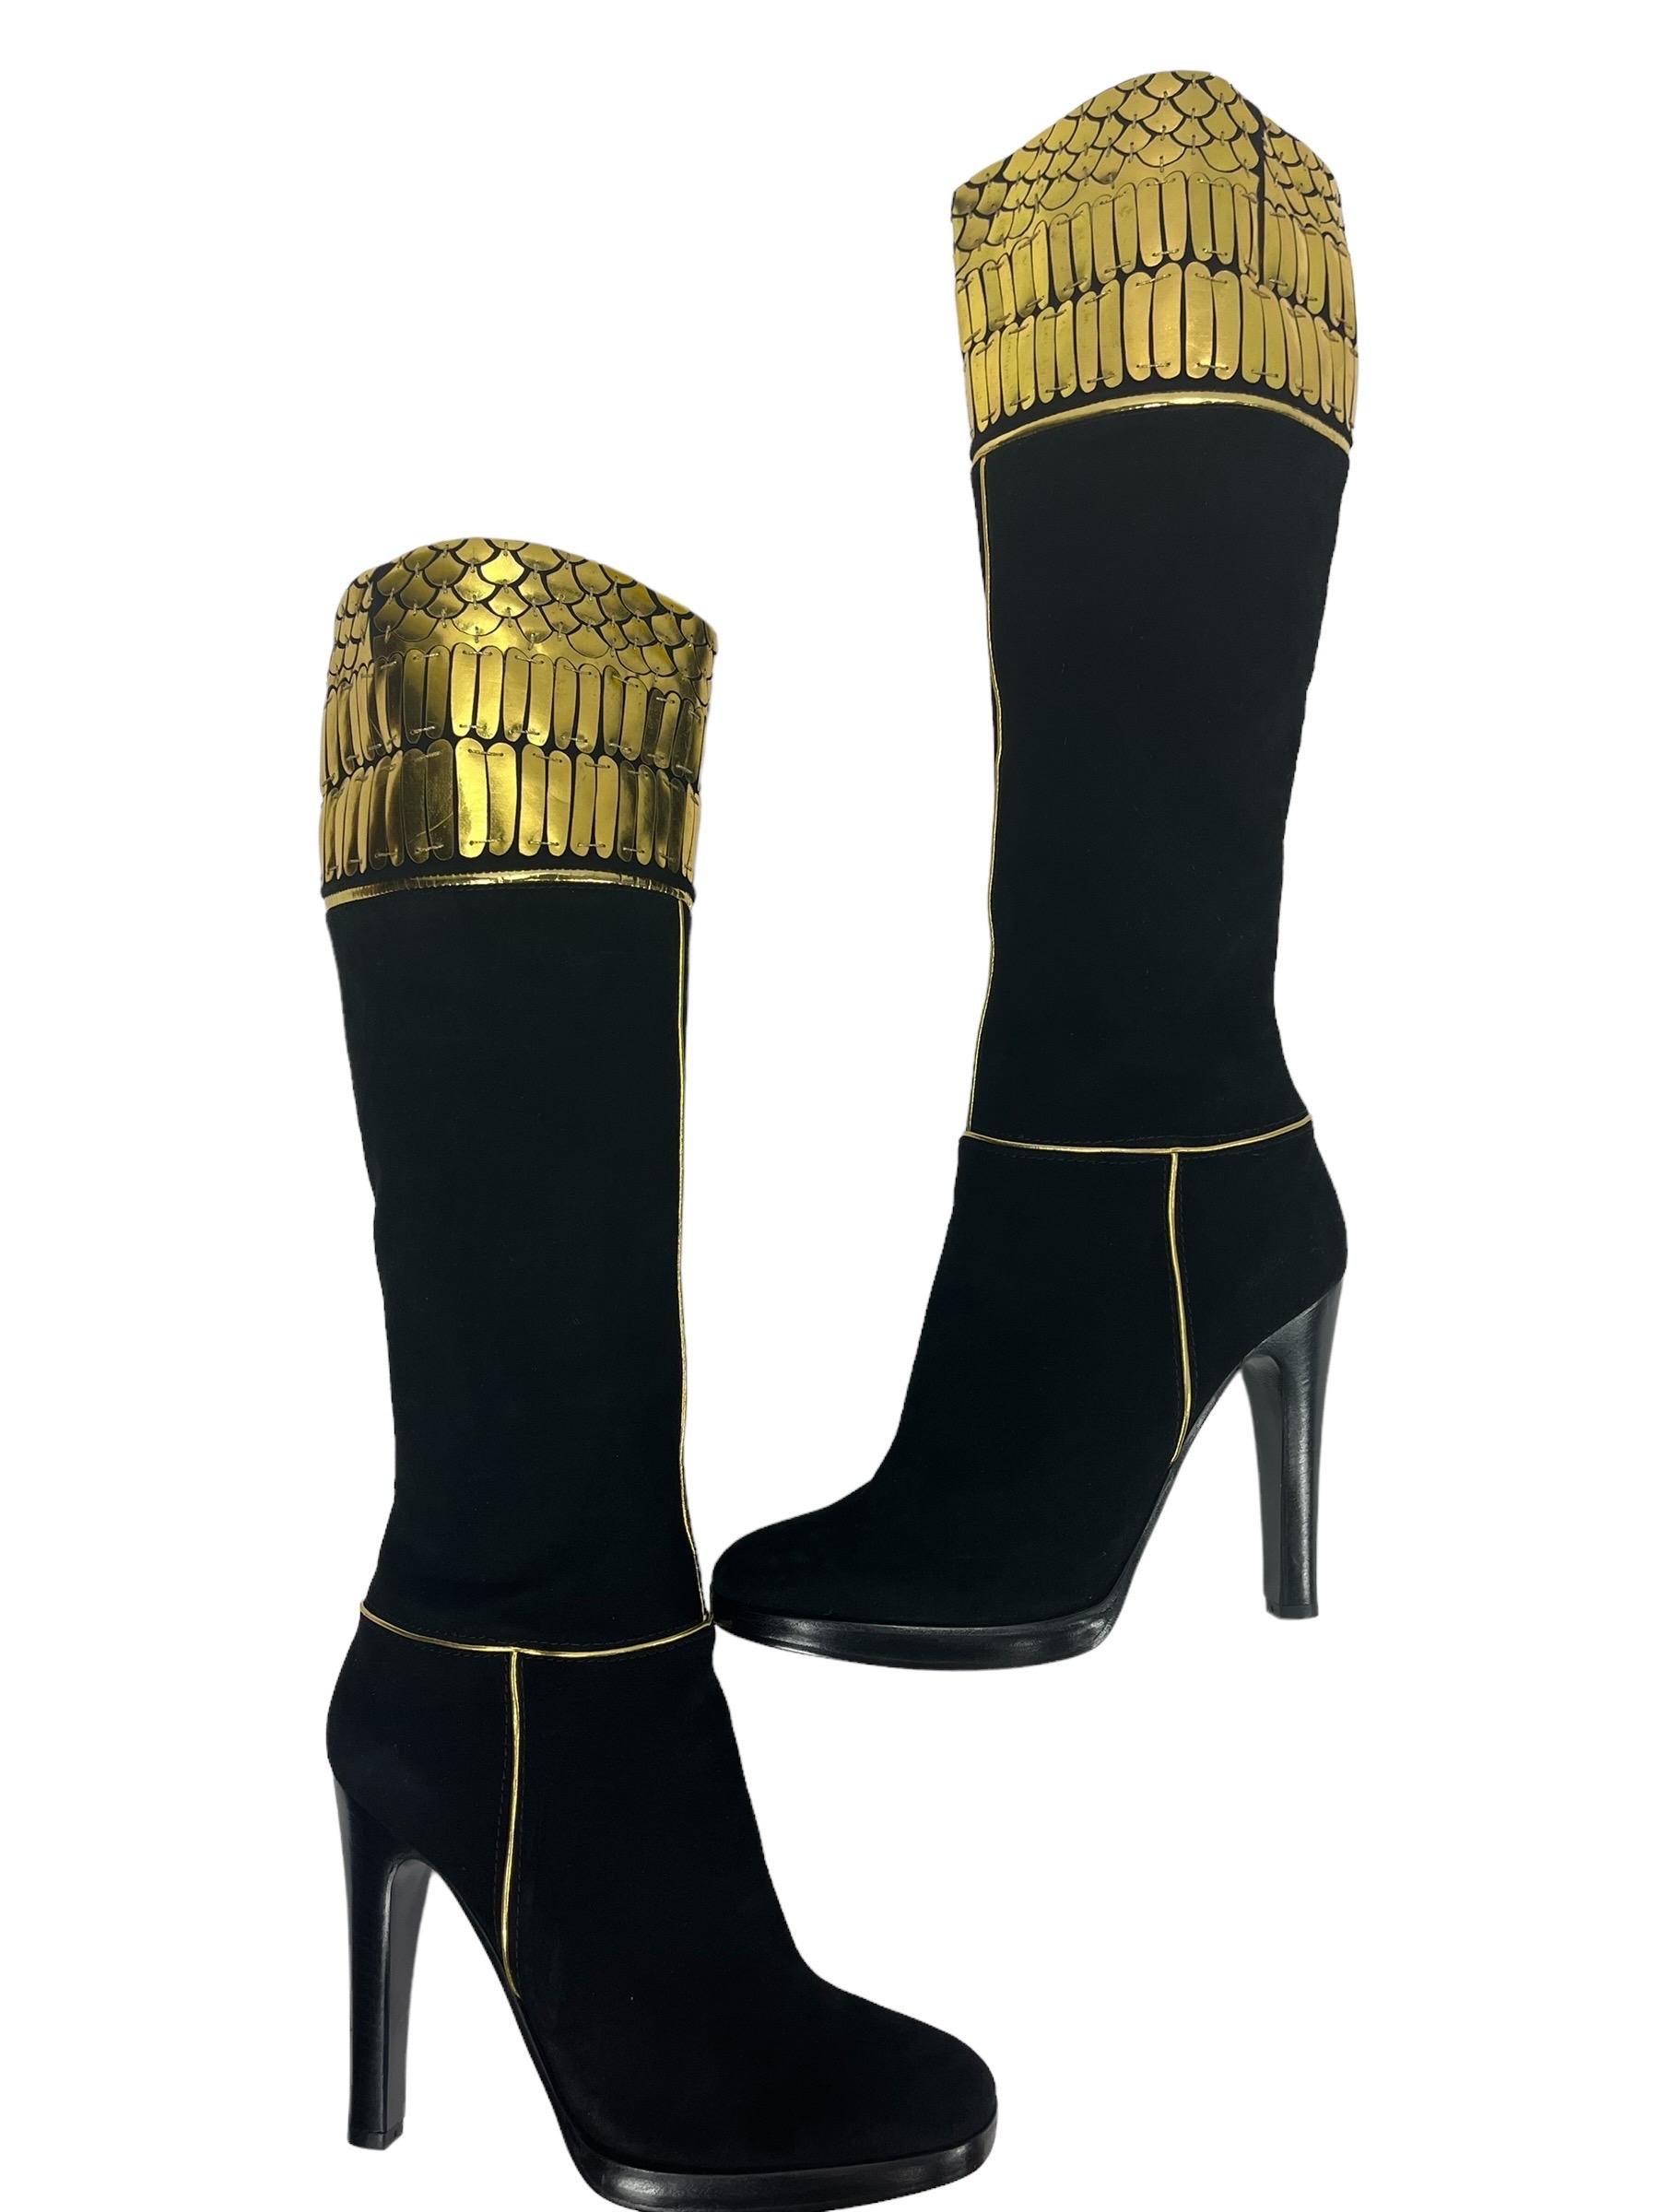 New Roberto Cavalli Black Suede Leather Knee Length Boots Gold Detail 38.5 & 41 In New Condition For Sale In Montgomery, TX